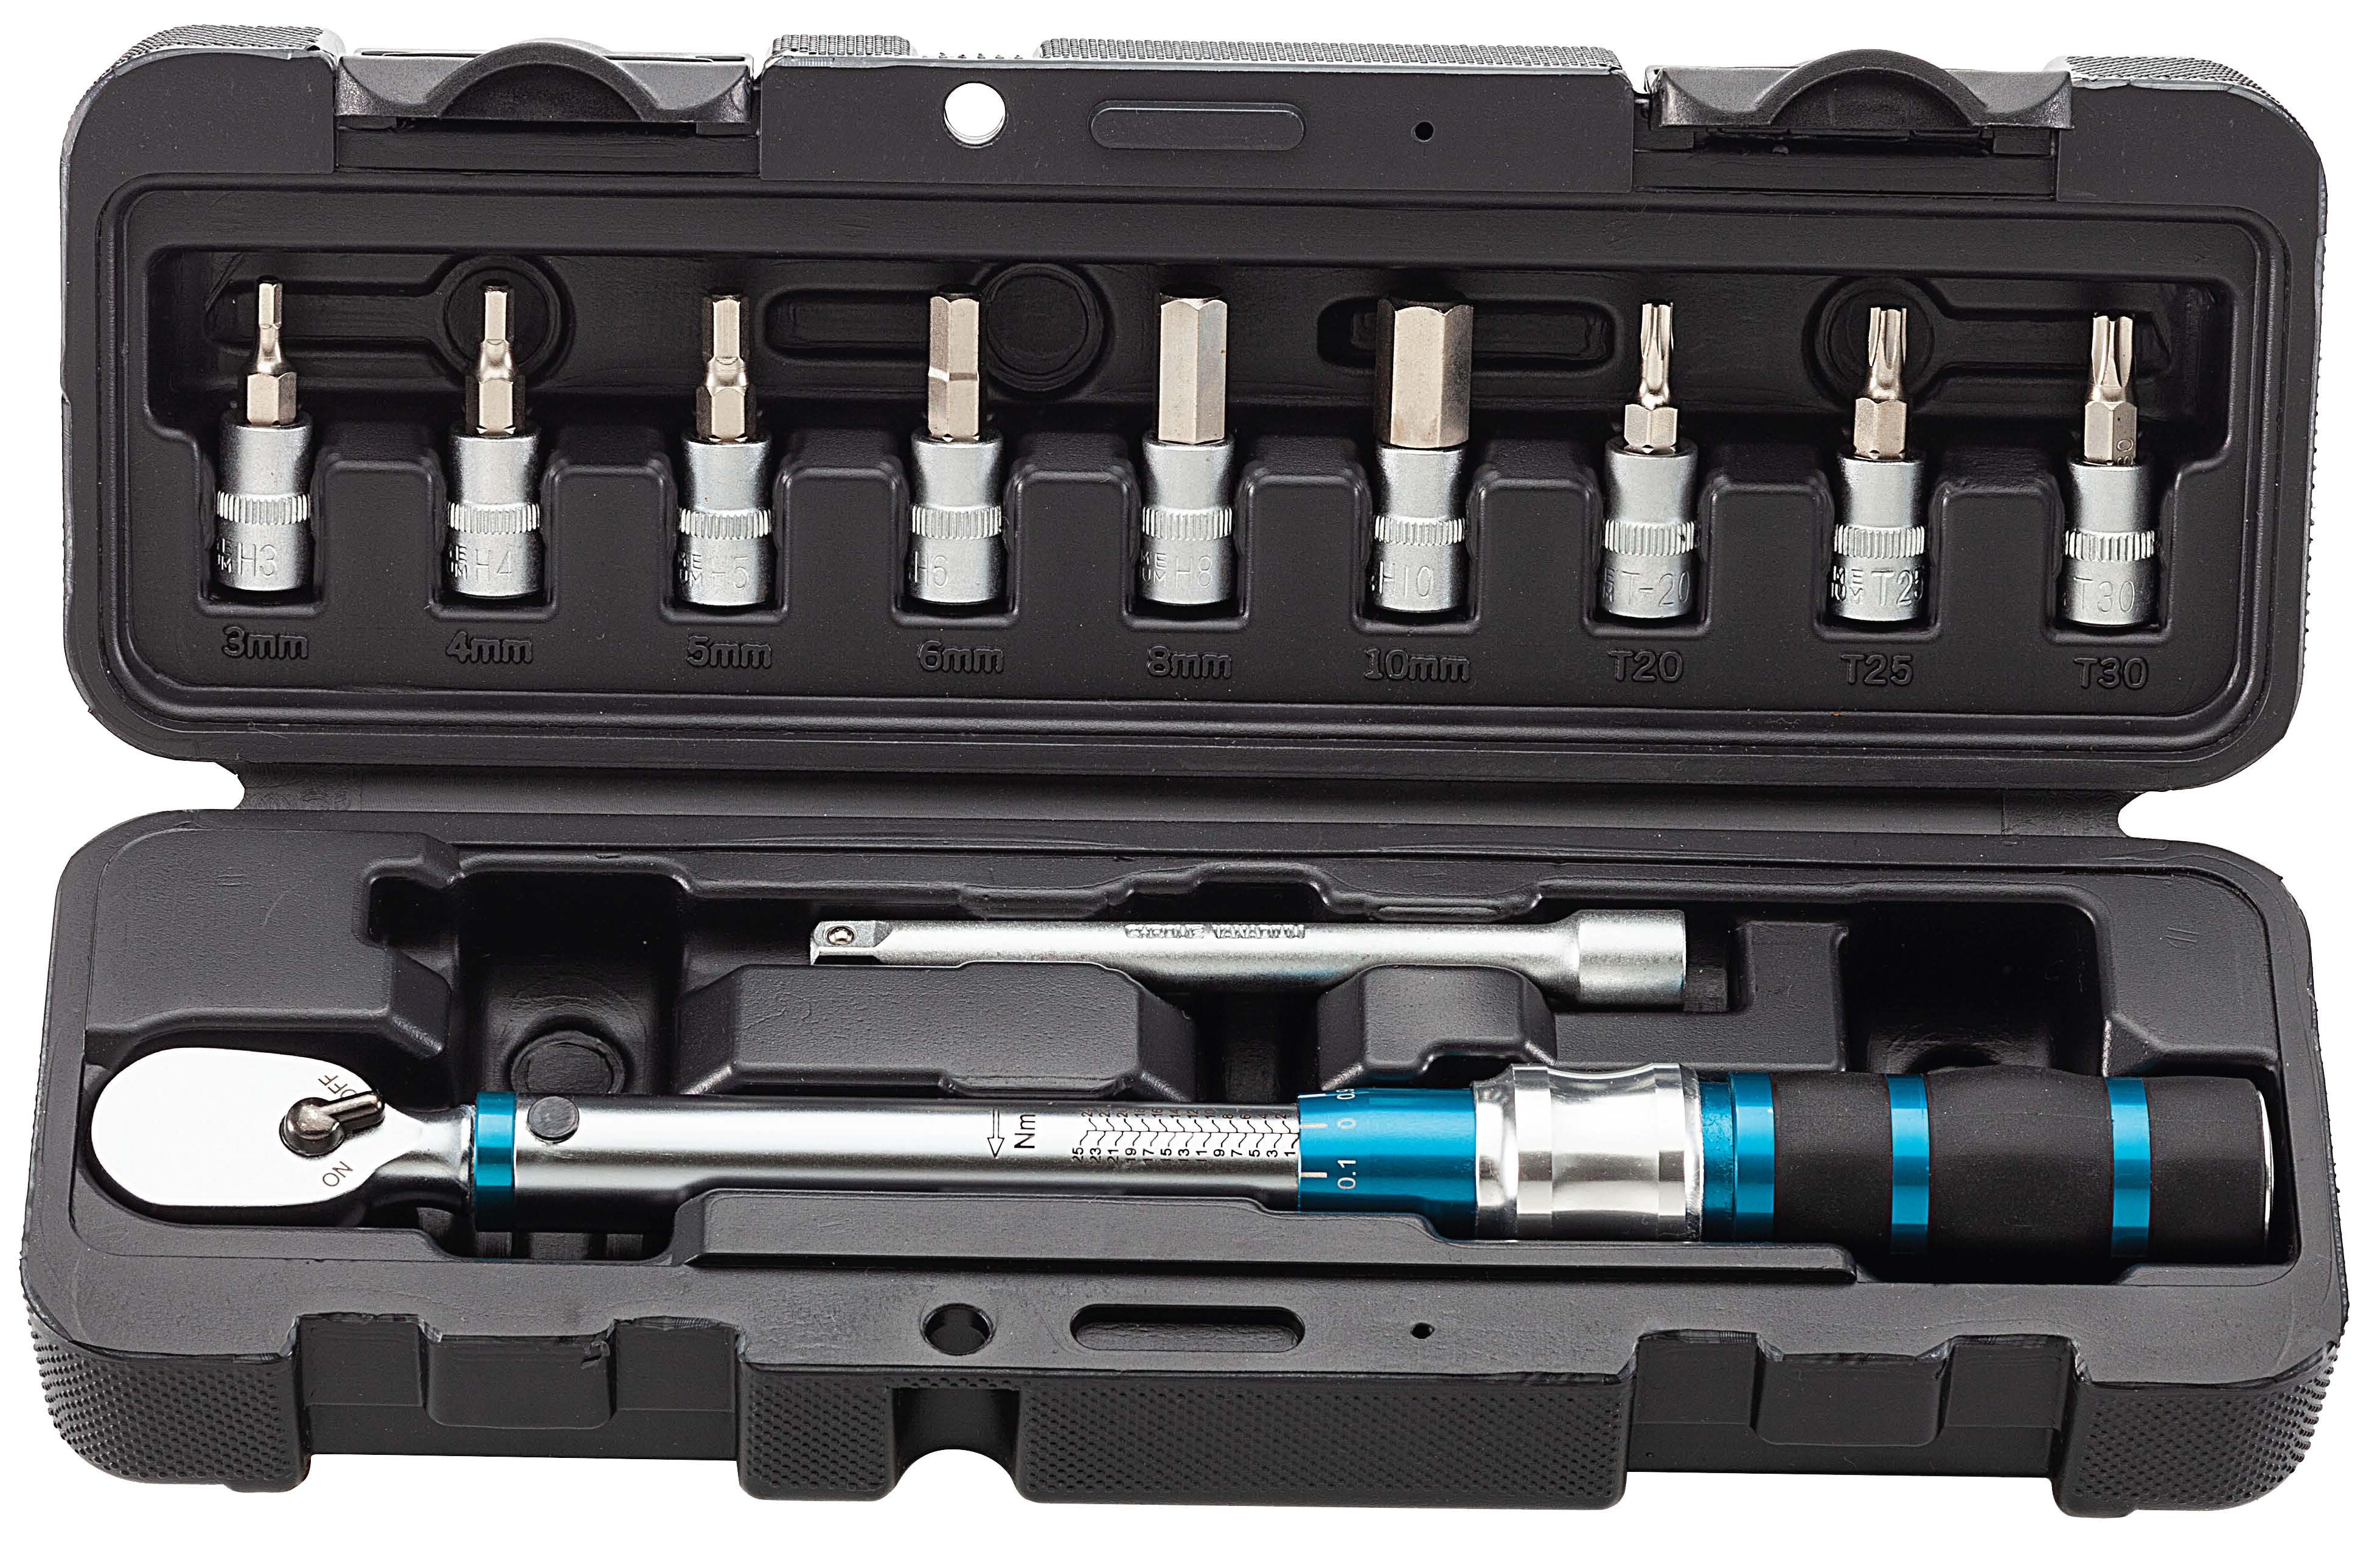 1/4" Dr. Adjustable Torque Wrench